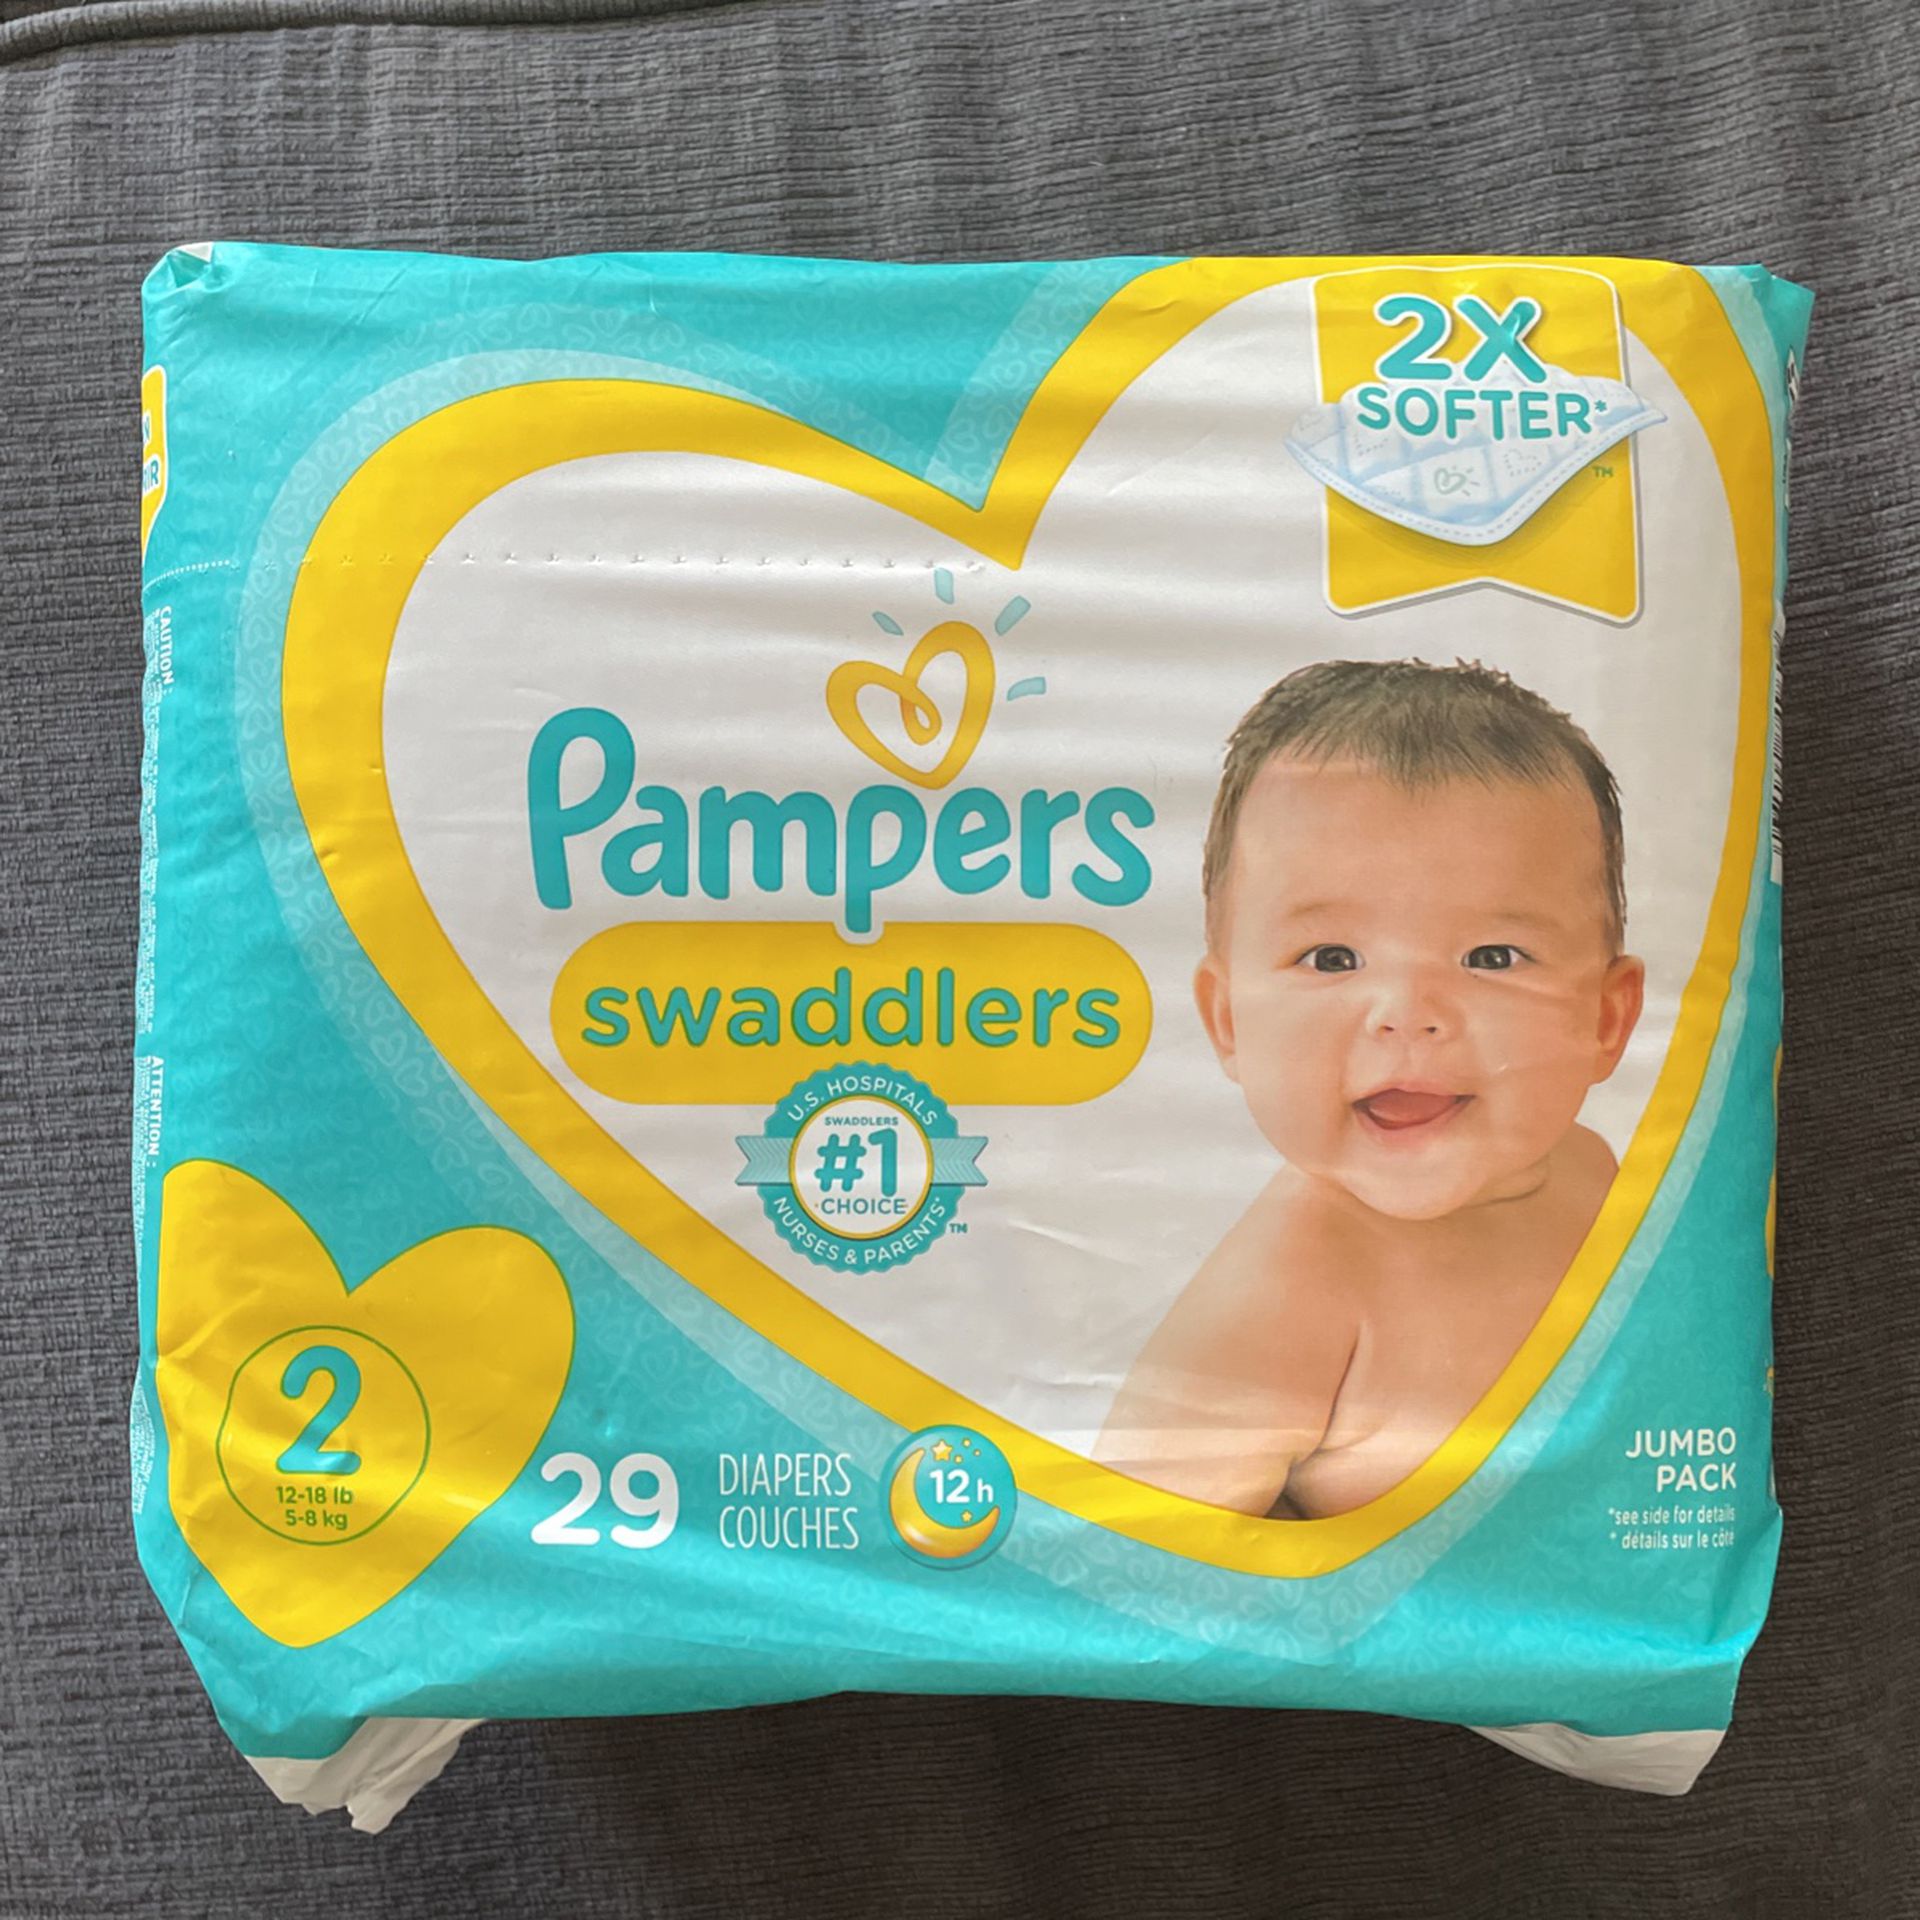 Pampers Swaddlers Size 2 - 29 count